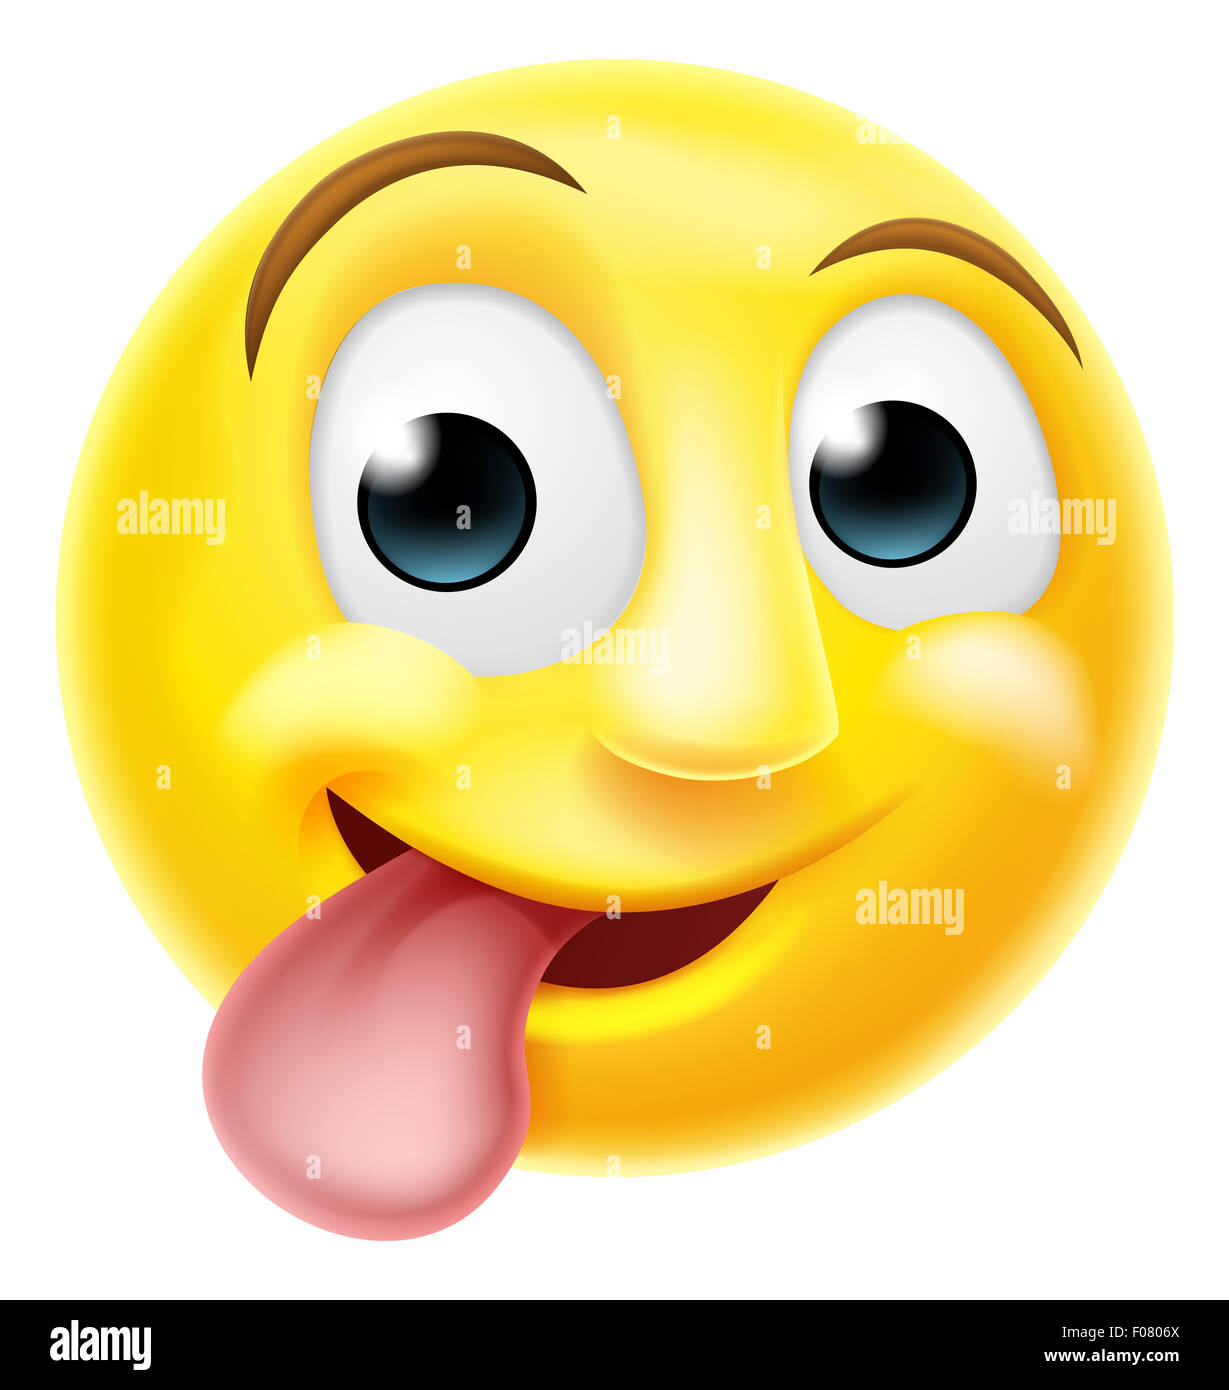 A happy cheeky emoji emoticon smiley face character sticking his tongue out Stock Photo